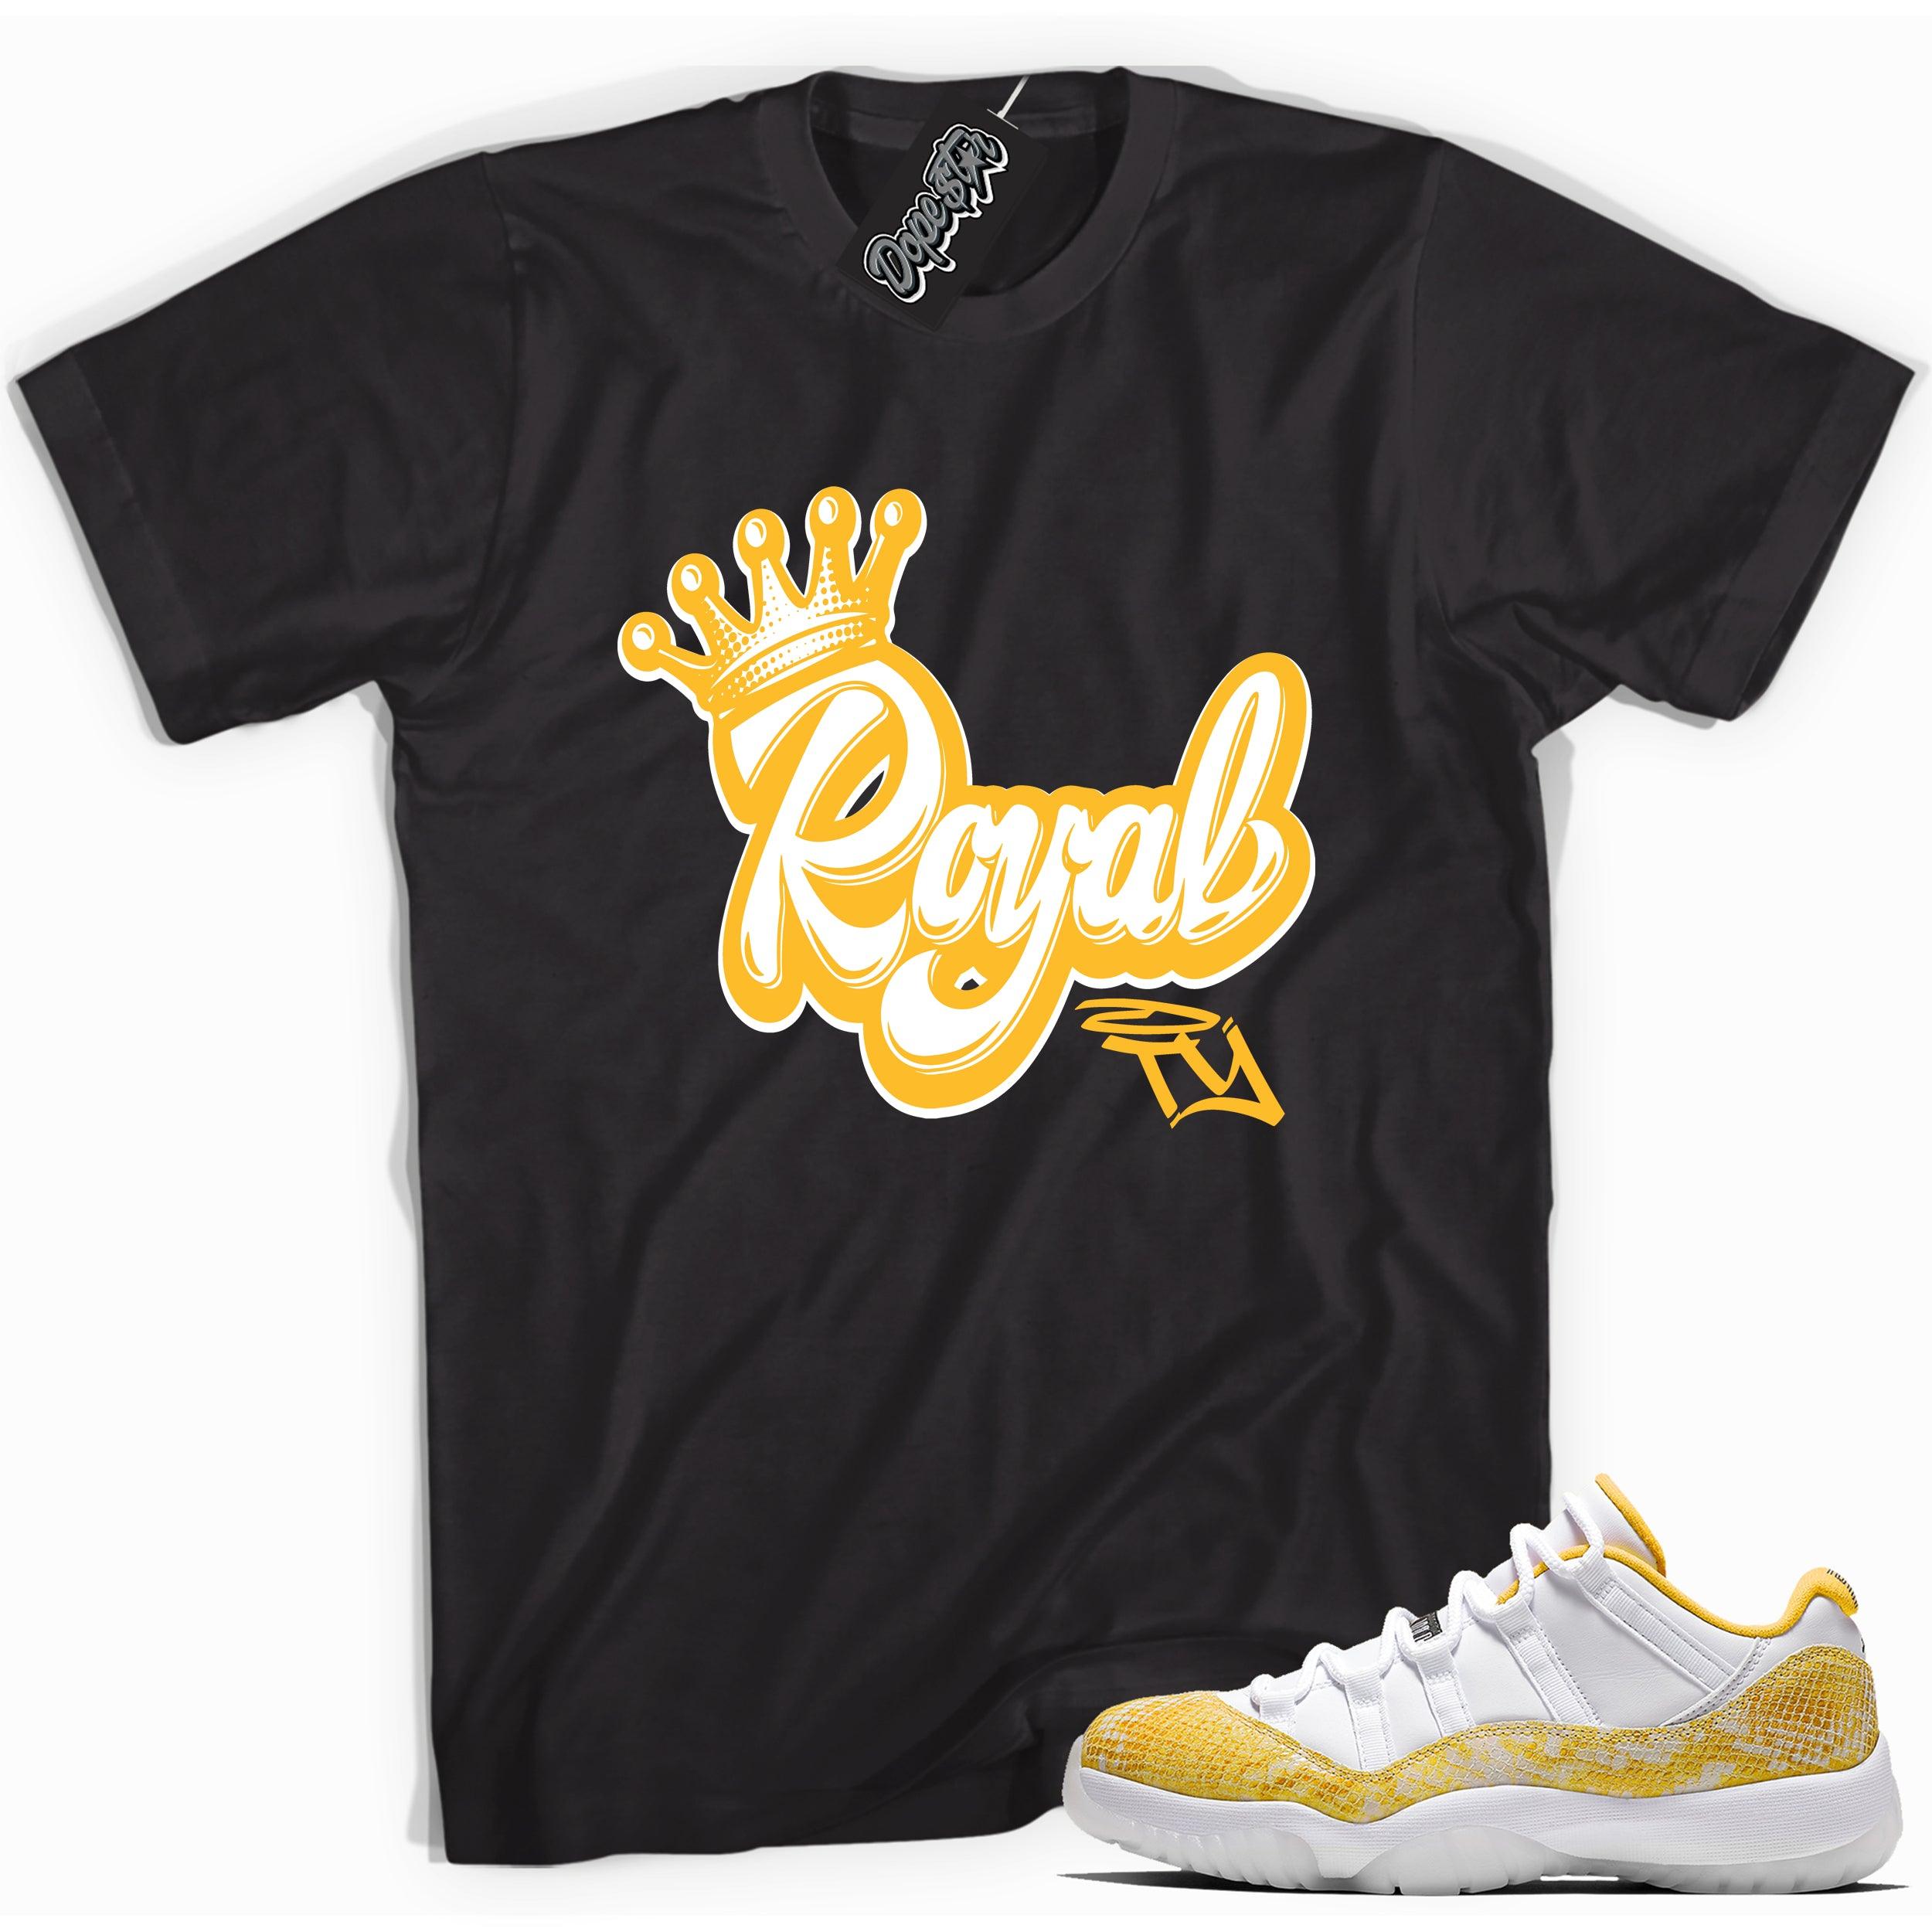 Cool black graphic tee with 'royalty' print, that perfectly matches  Air Jordan 11 Retro Low Yellow Snakeskin sneakers